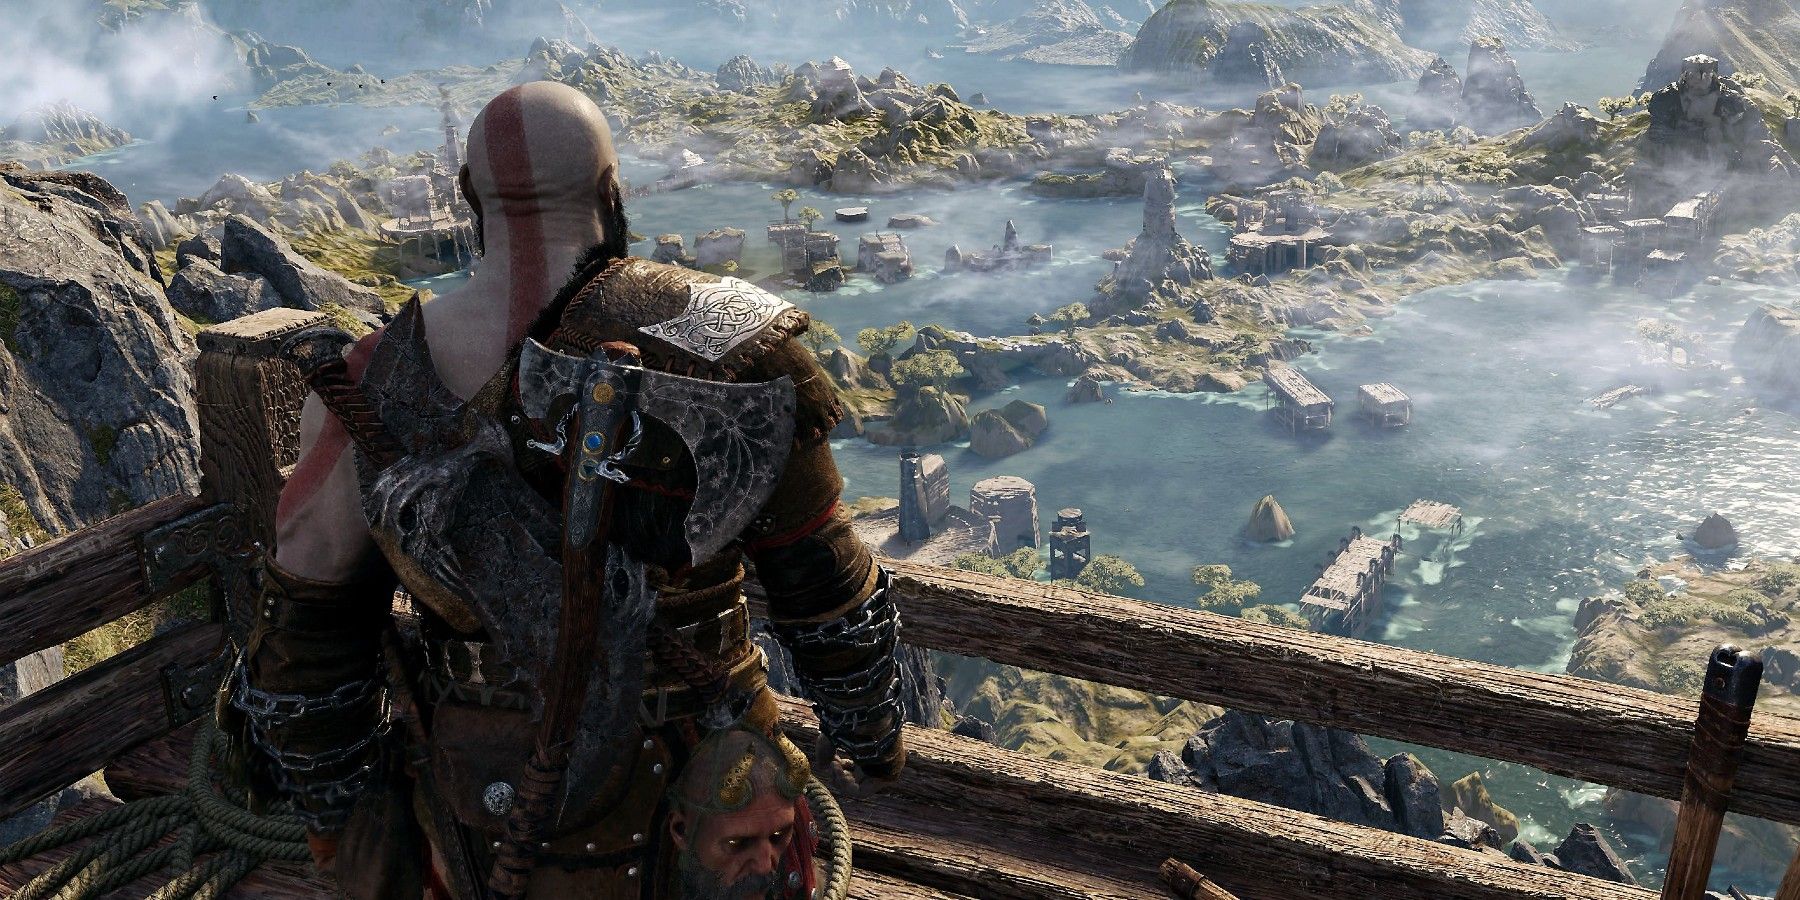 God of War: Ragnarok is launching on November 9th - The Verge